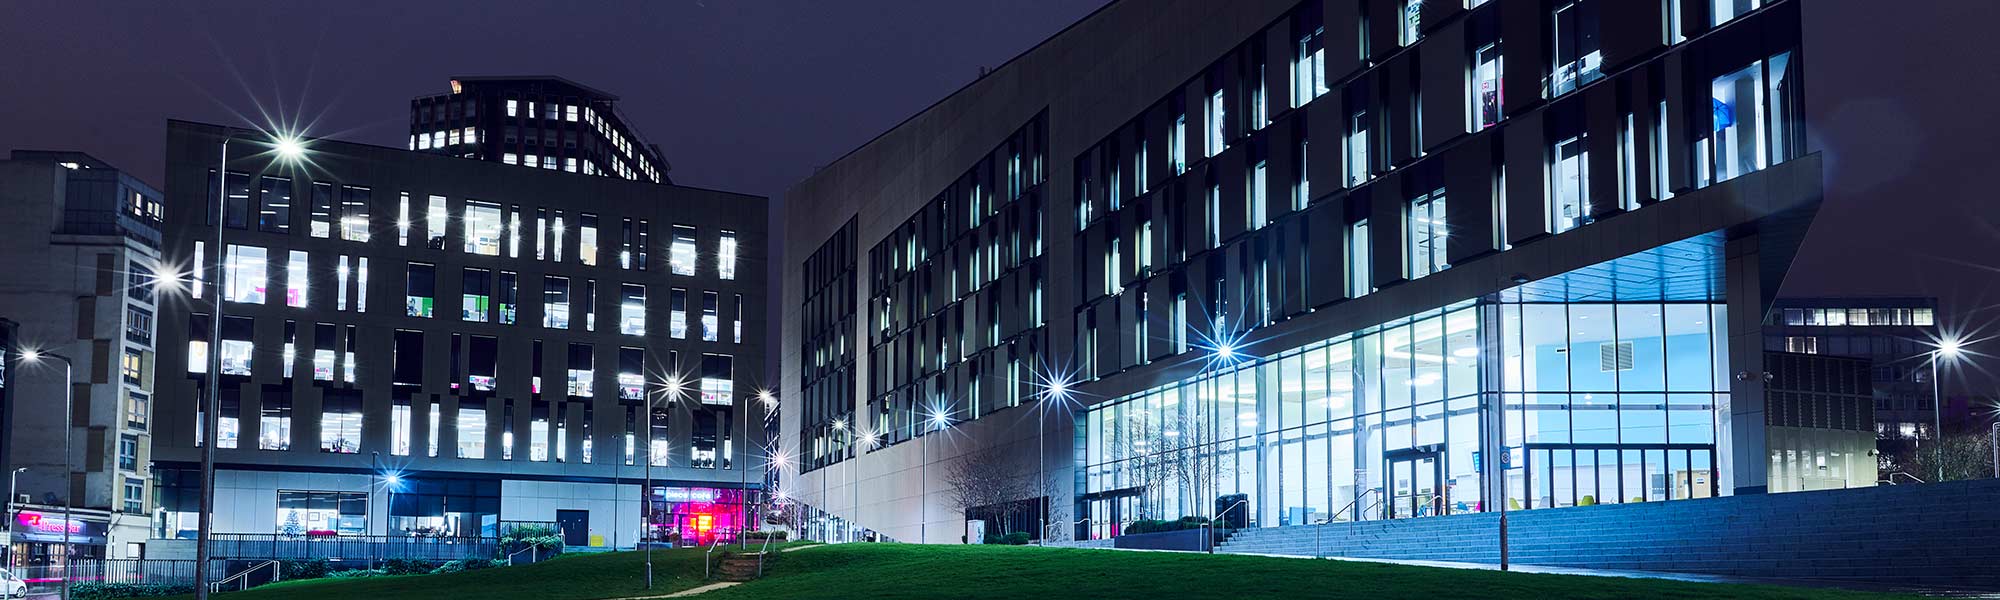 Technology & Innovation Centre and Inovo buildings at night.